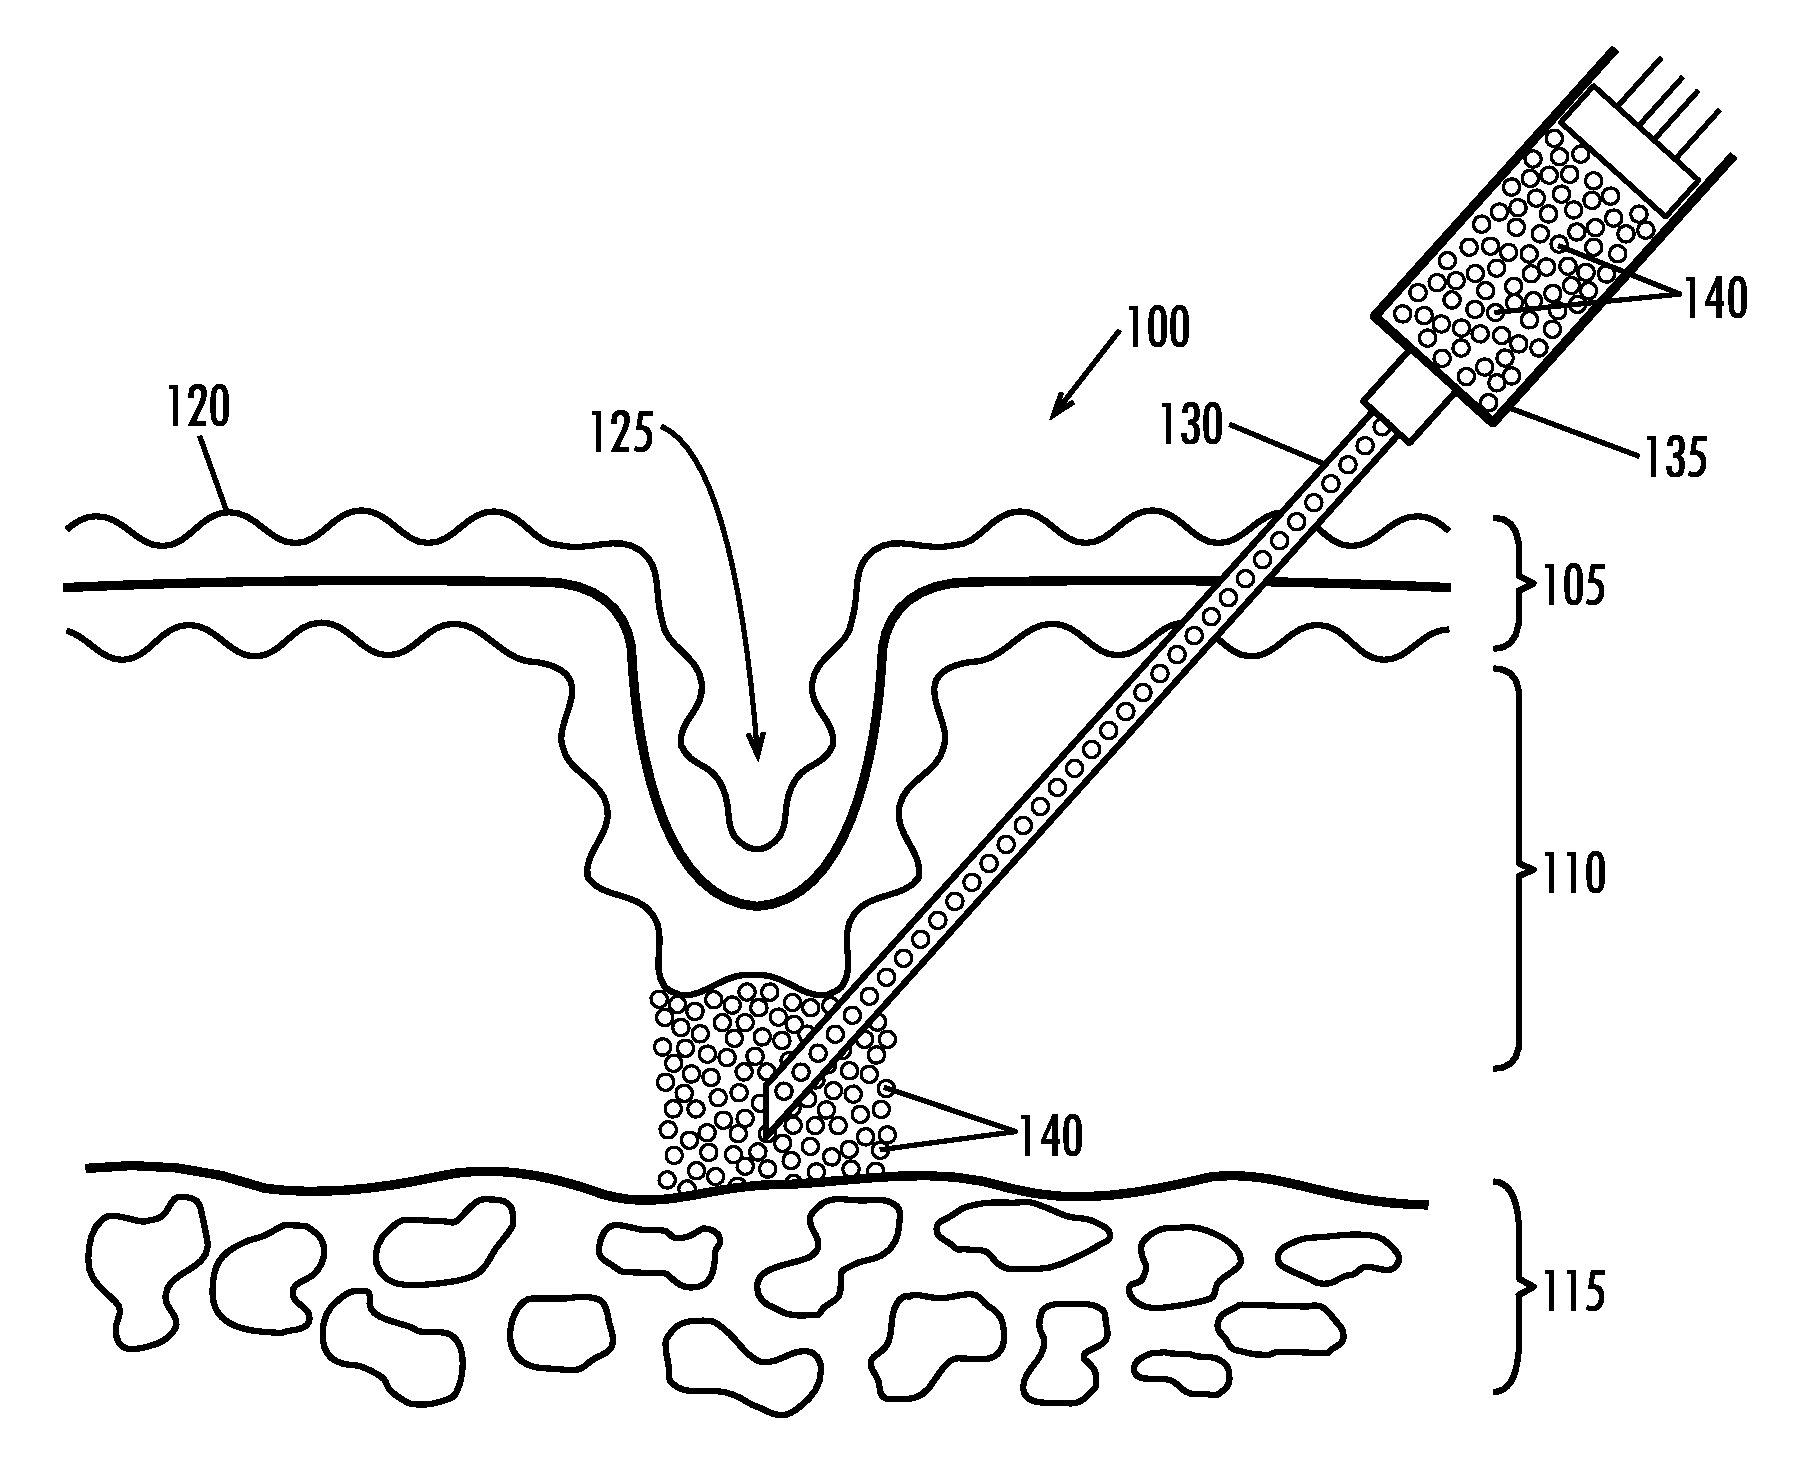 Loadable Polymeric Particles for Cosmetic and Reconstructive Tissue Augmentation Applications and Methods of Preparing and Using the Same